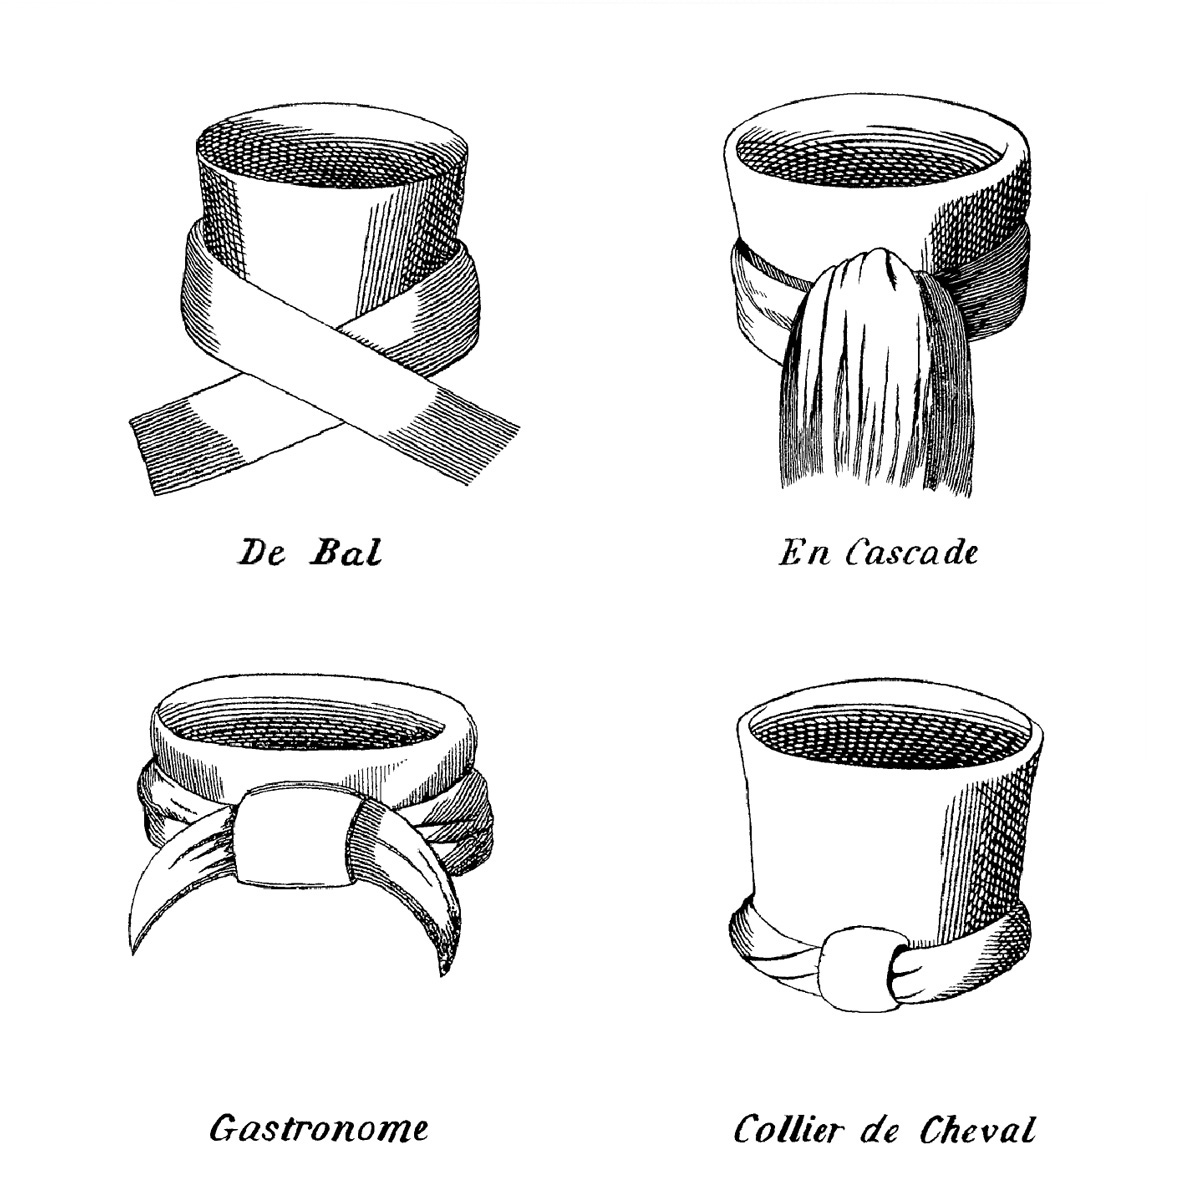 An illustration from H. Le Blanc’s The Art of Tying the Cravat depicting four different types of knots.